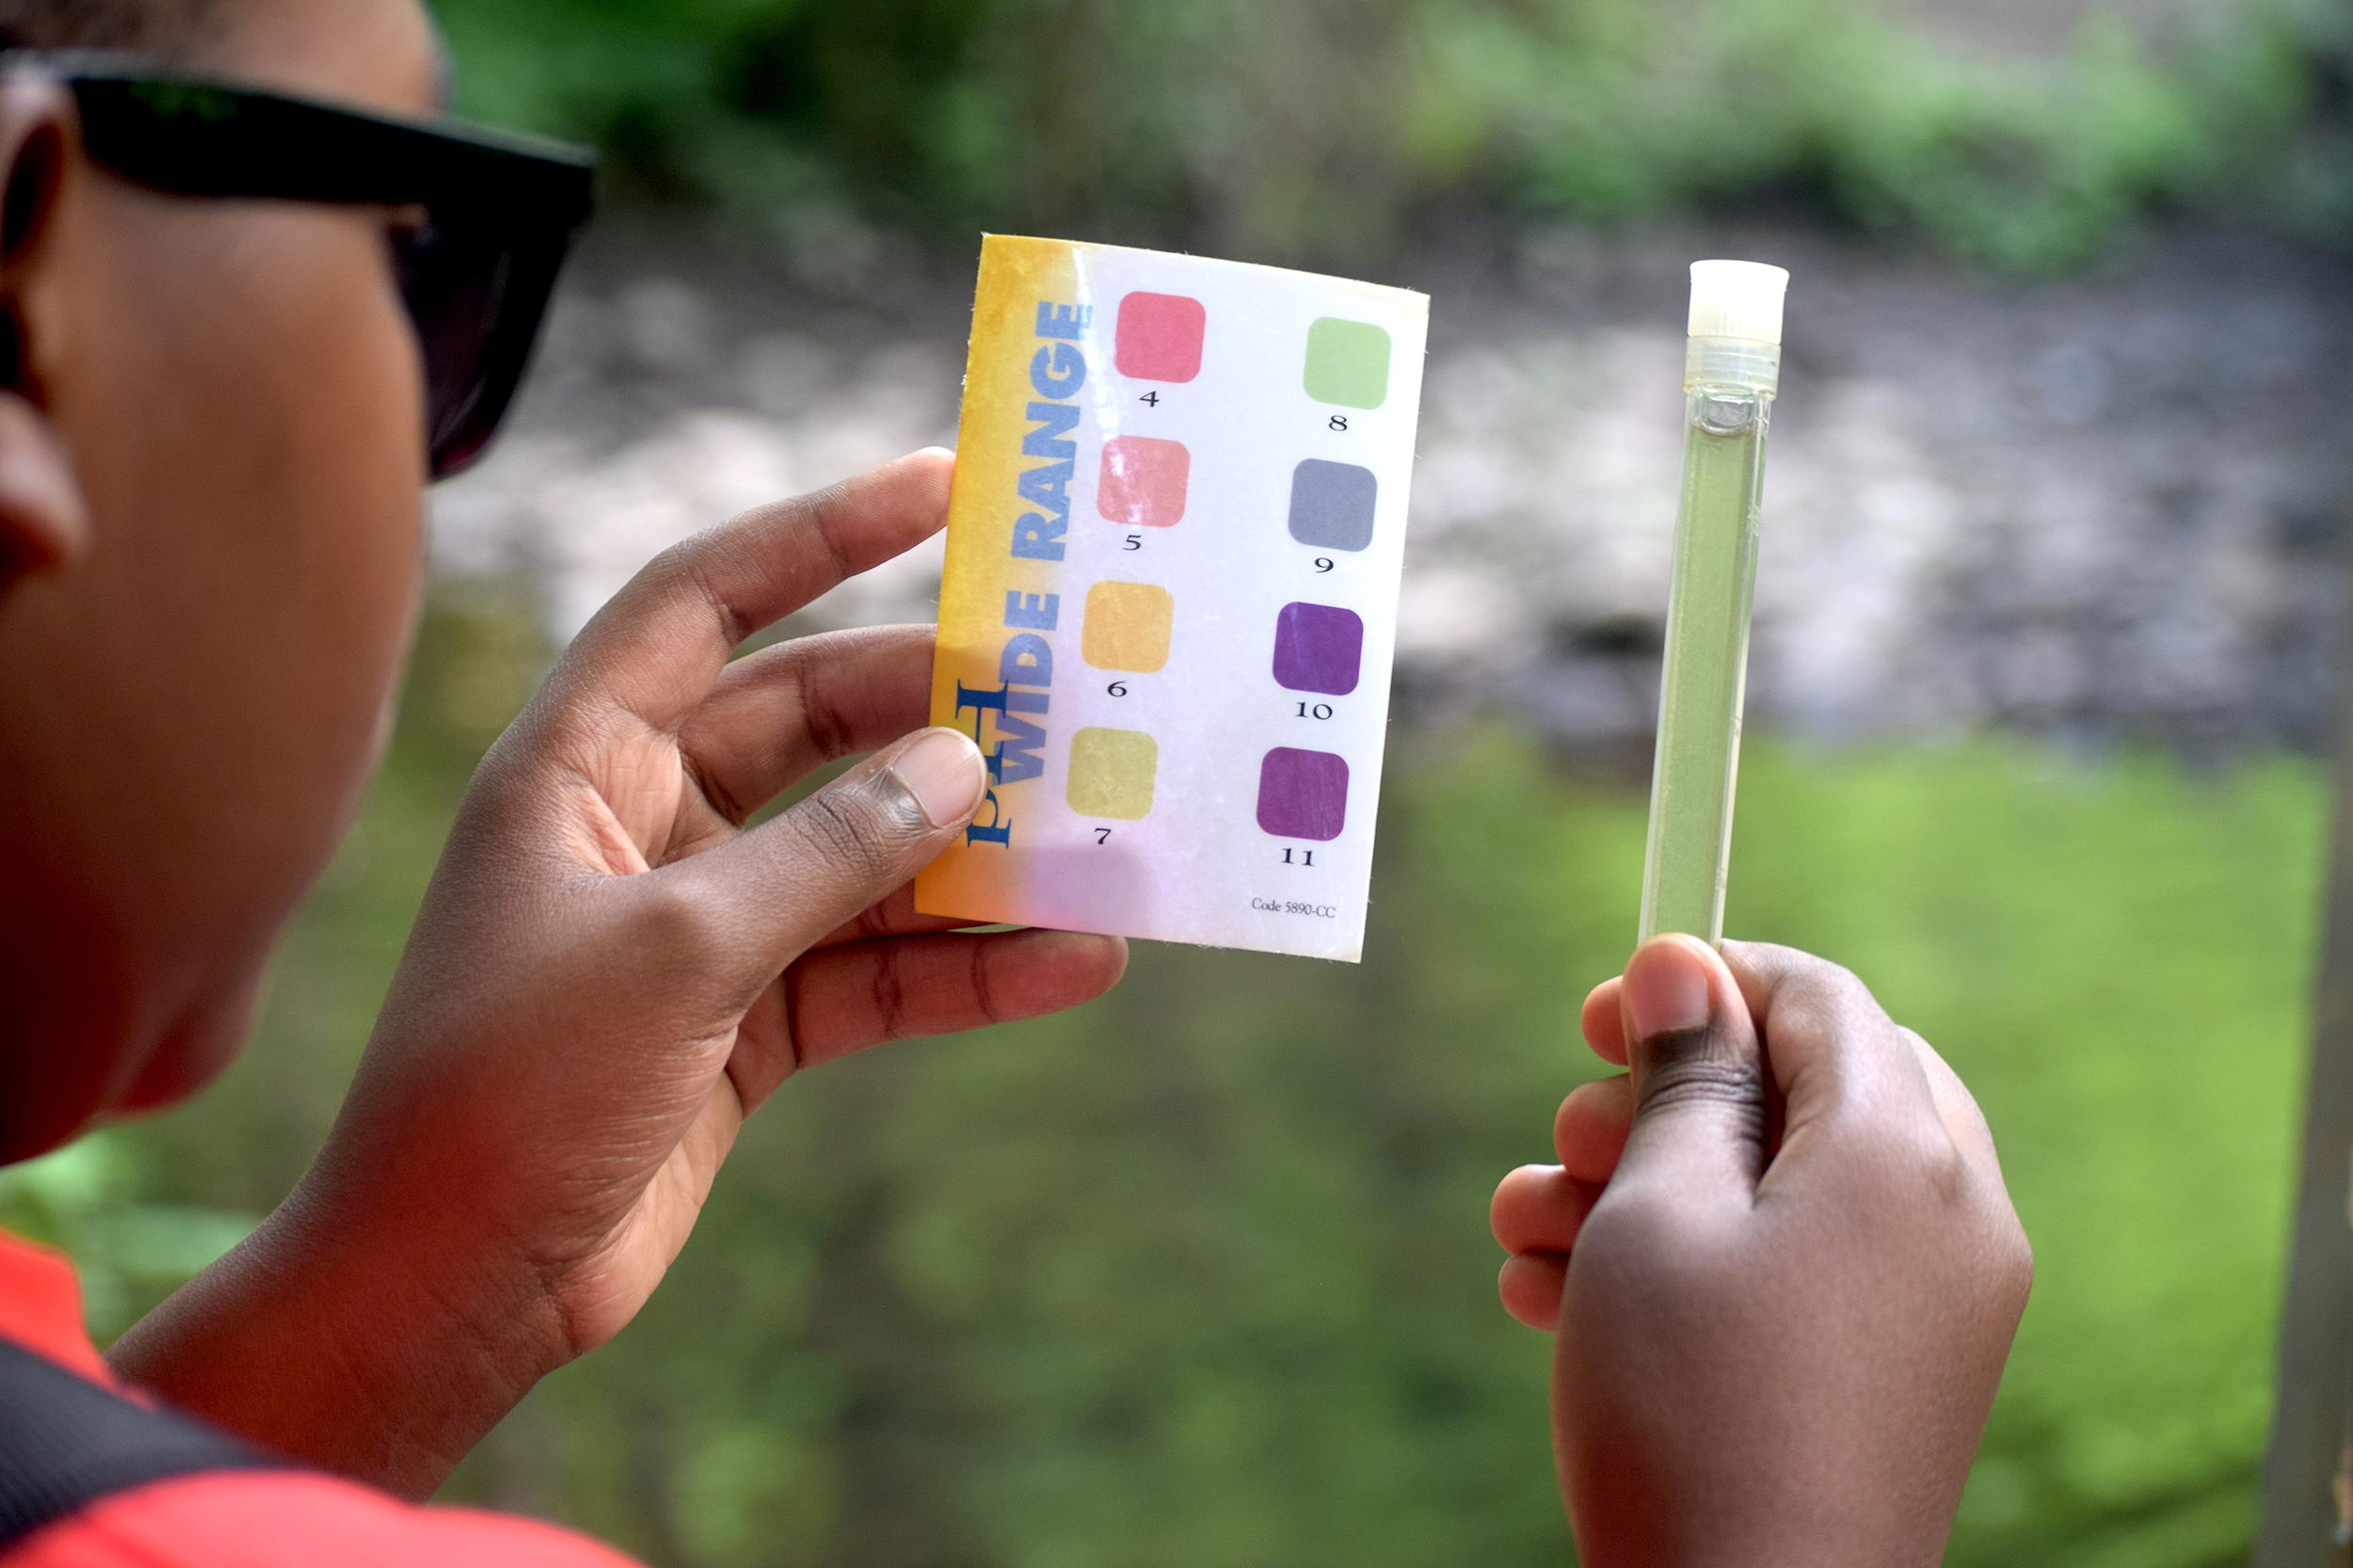 A person looks at a vial of liquid and a small sheet showing colors with the words "pH WIDE RANGE"